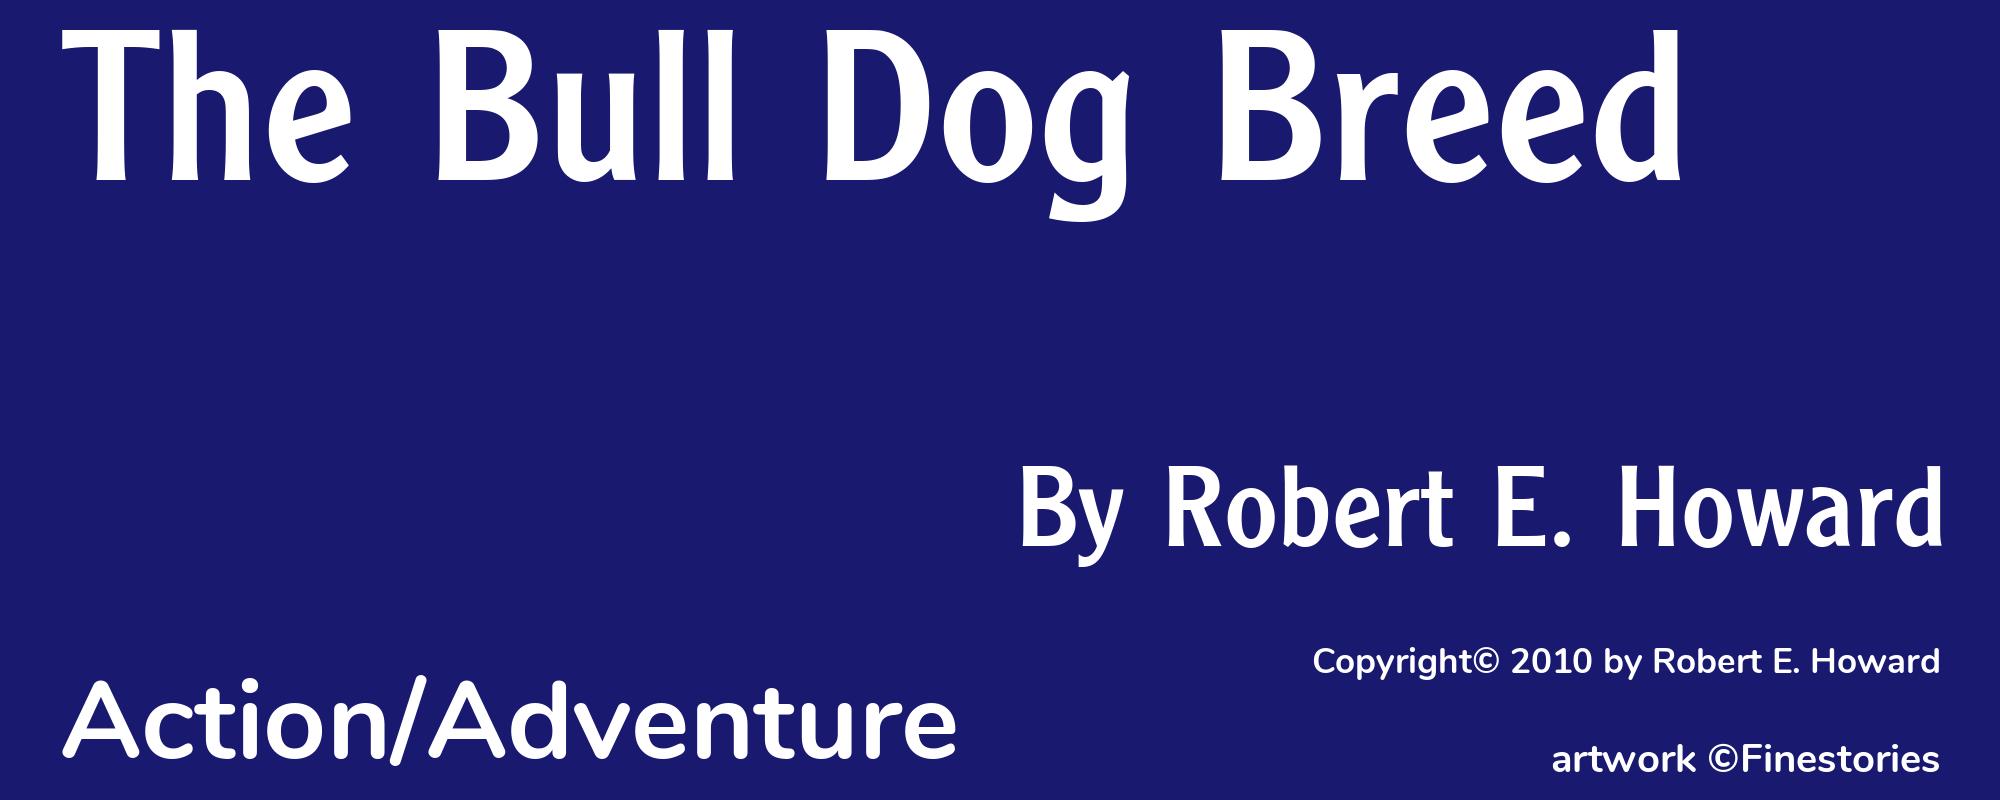 The Bull Dog Breed - Cover